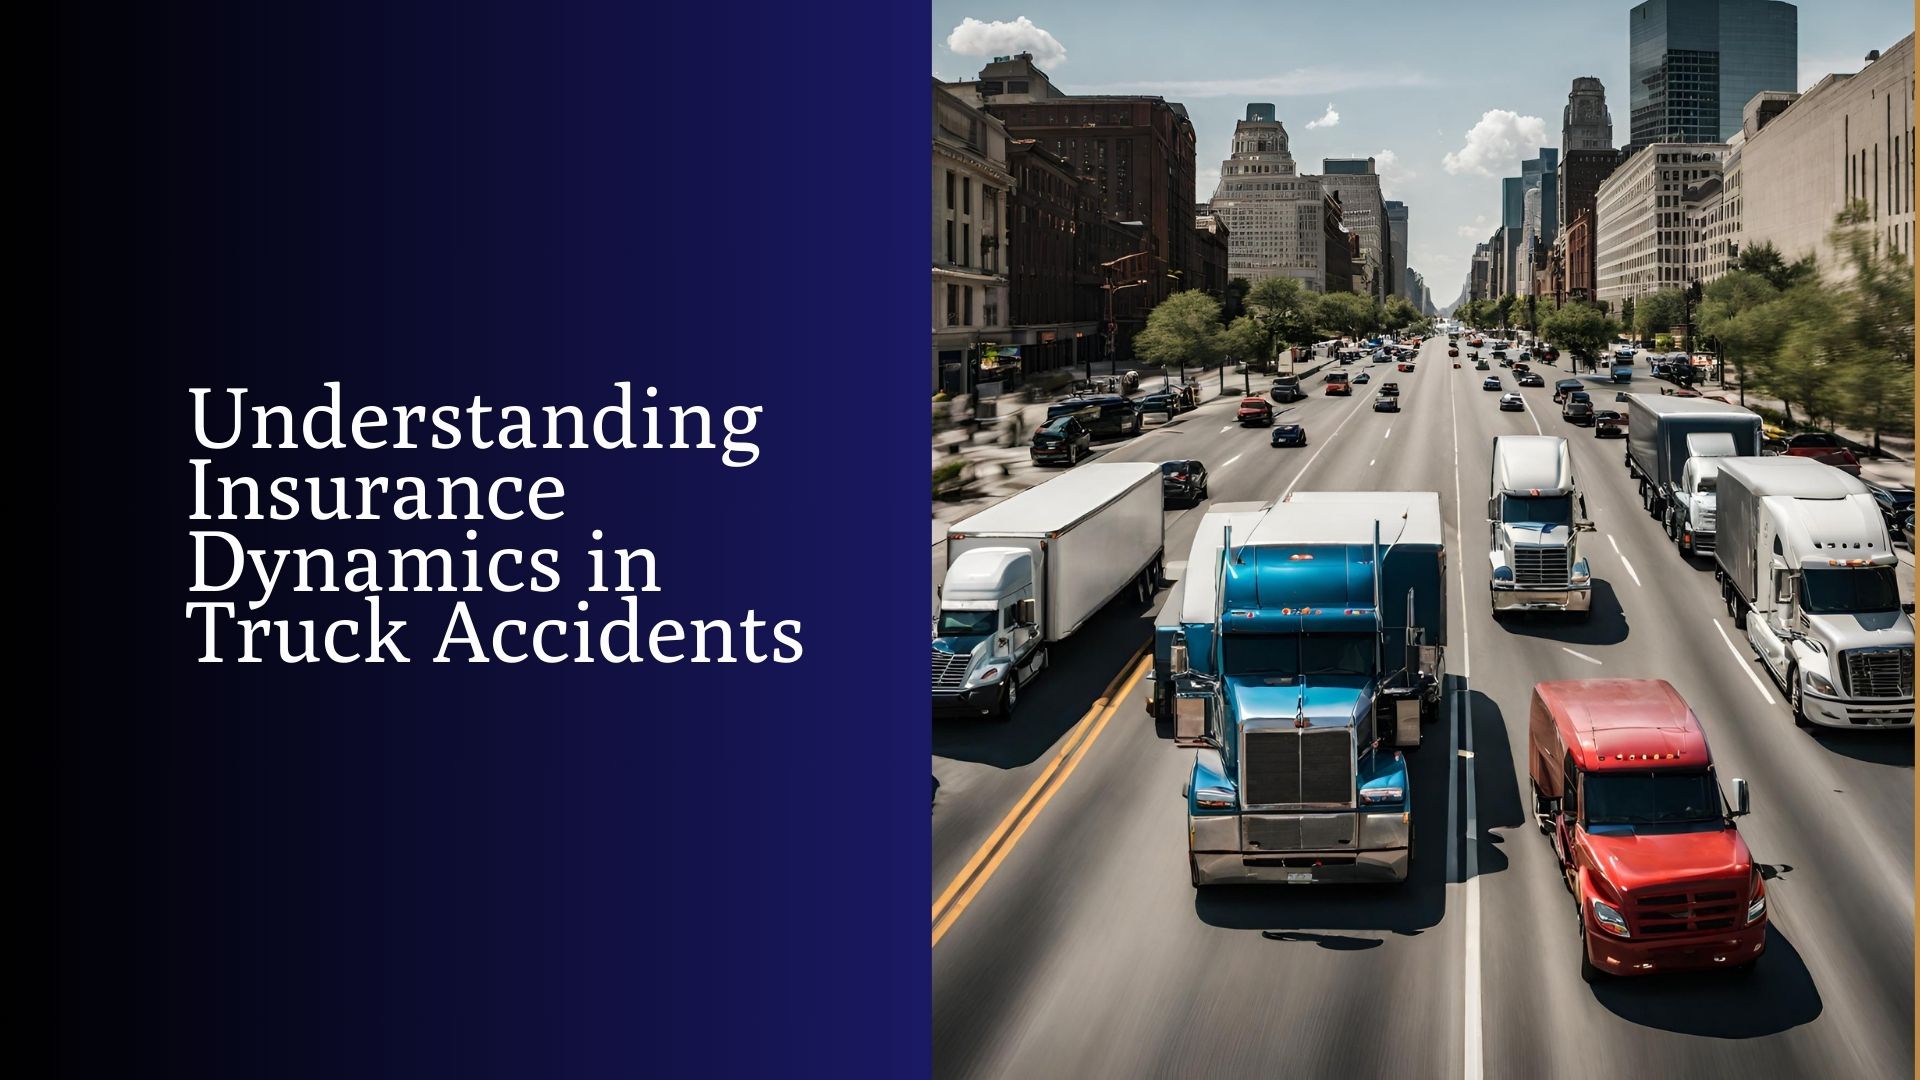 Attorney-Accident-Truck-Understanding-Insurance-Dynamics-in-Truck-Accidents 